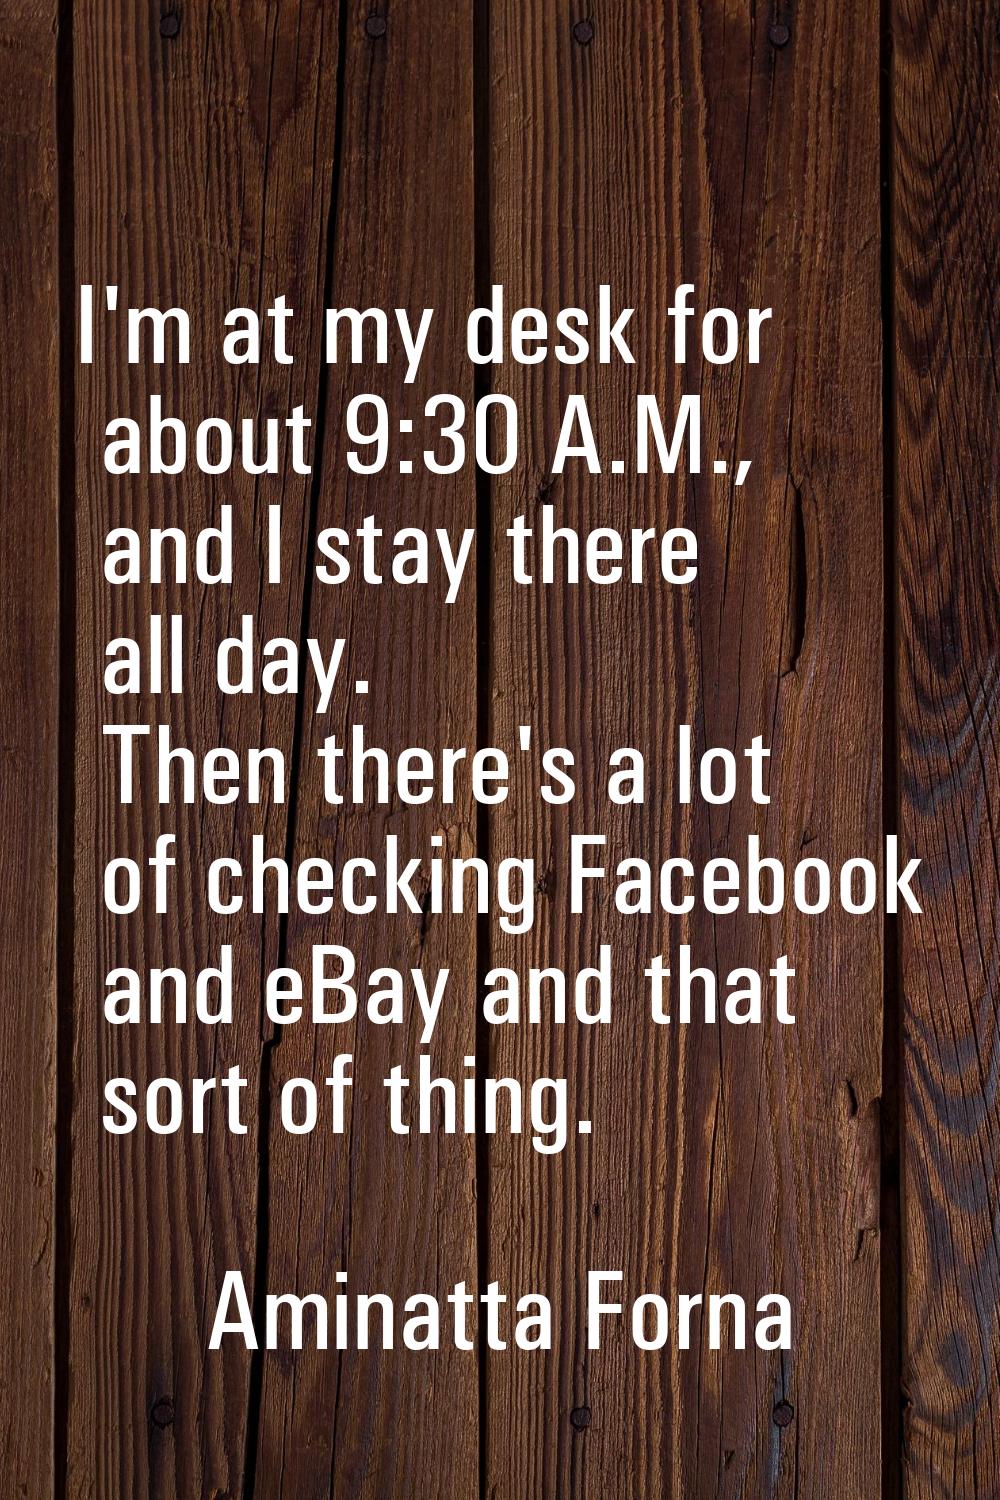 I'm at my desk for about 9:30 A.M., and I stay there all day. Then there's a lot of checking Facebo